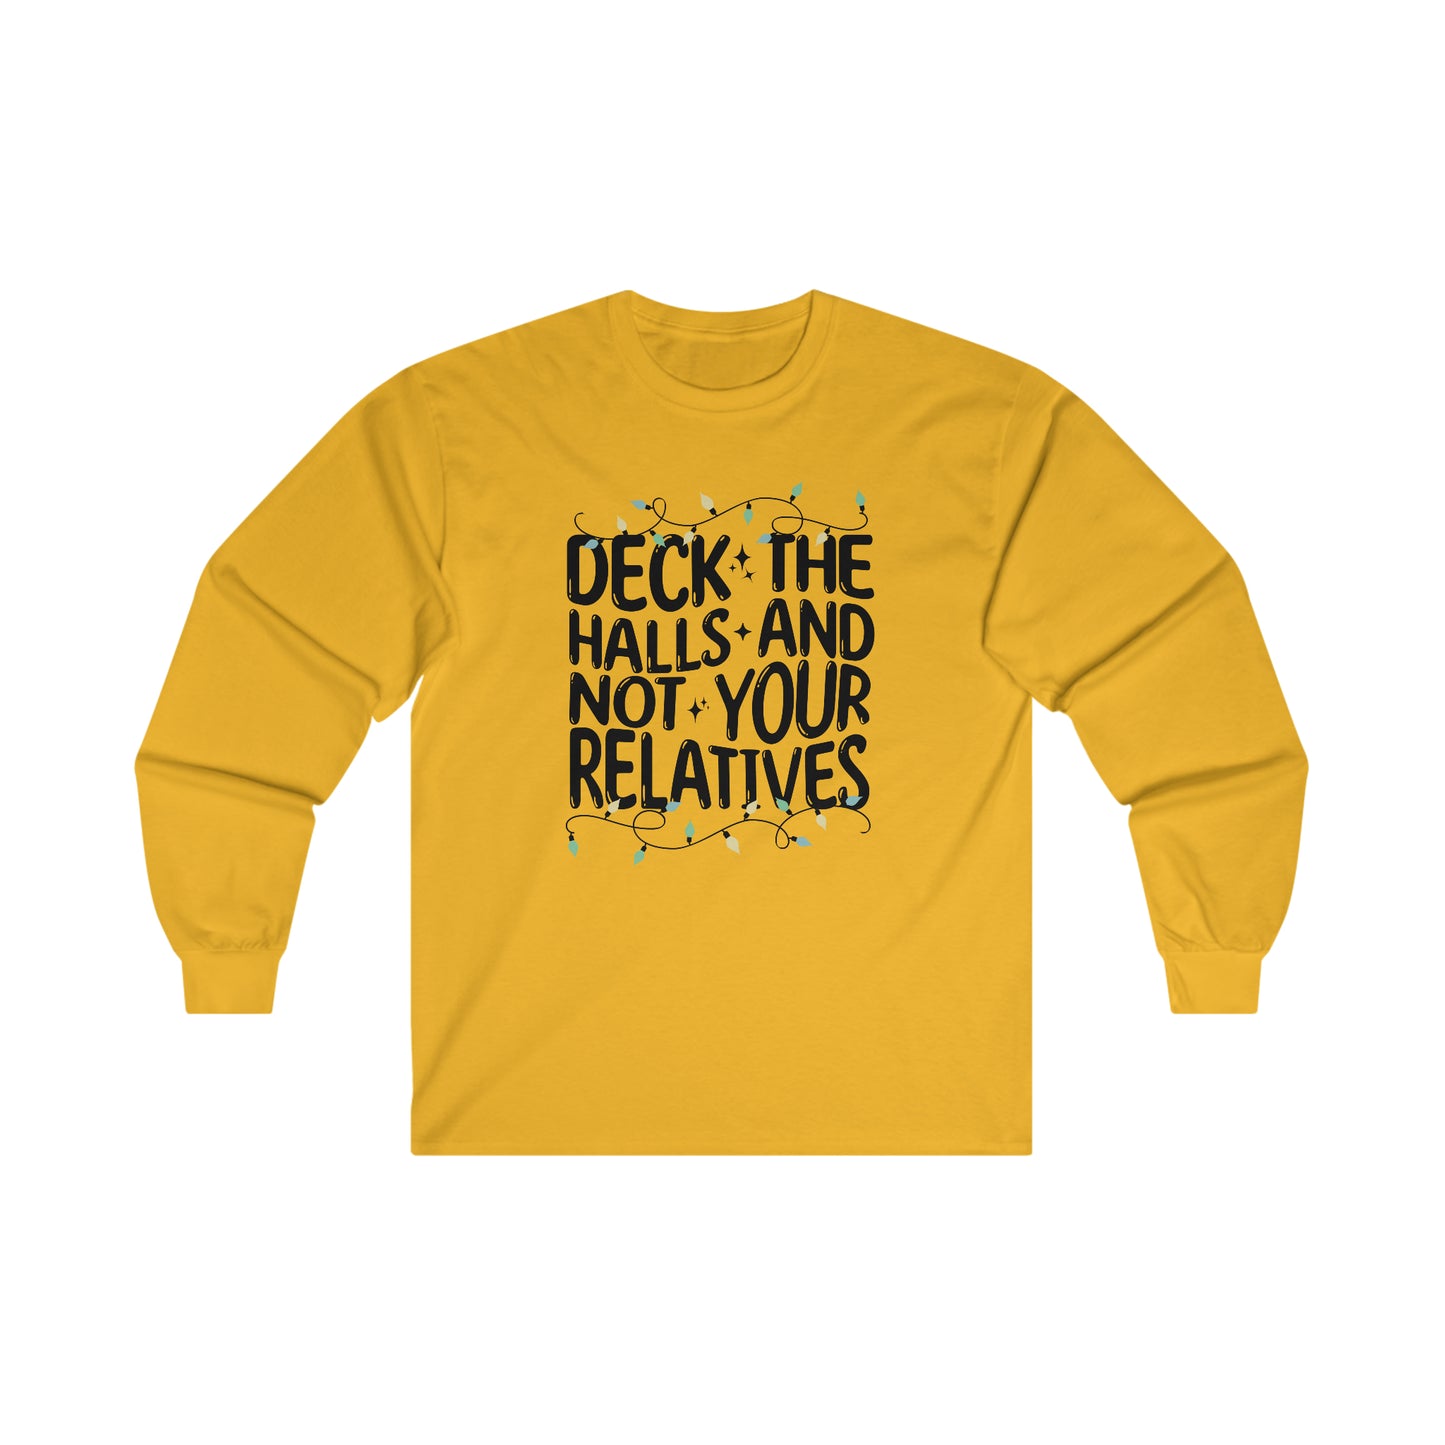 Deck The Halls-Not Your Relatives Long Sleeve Tee